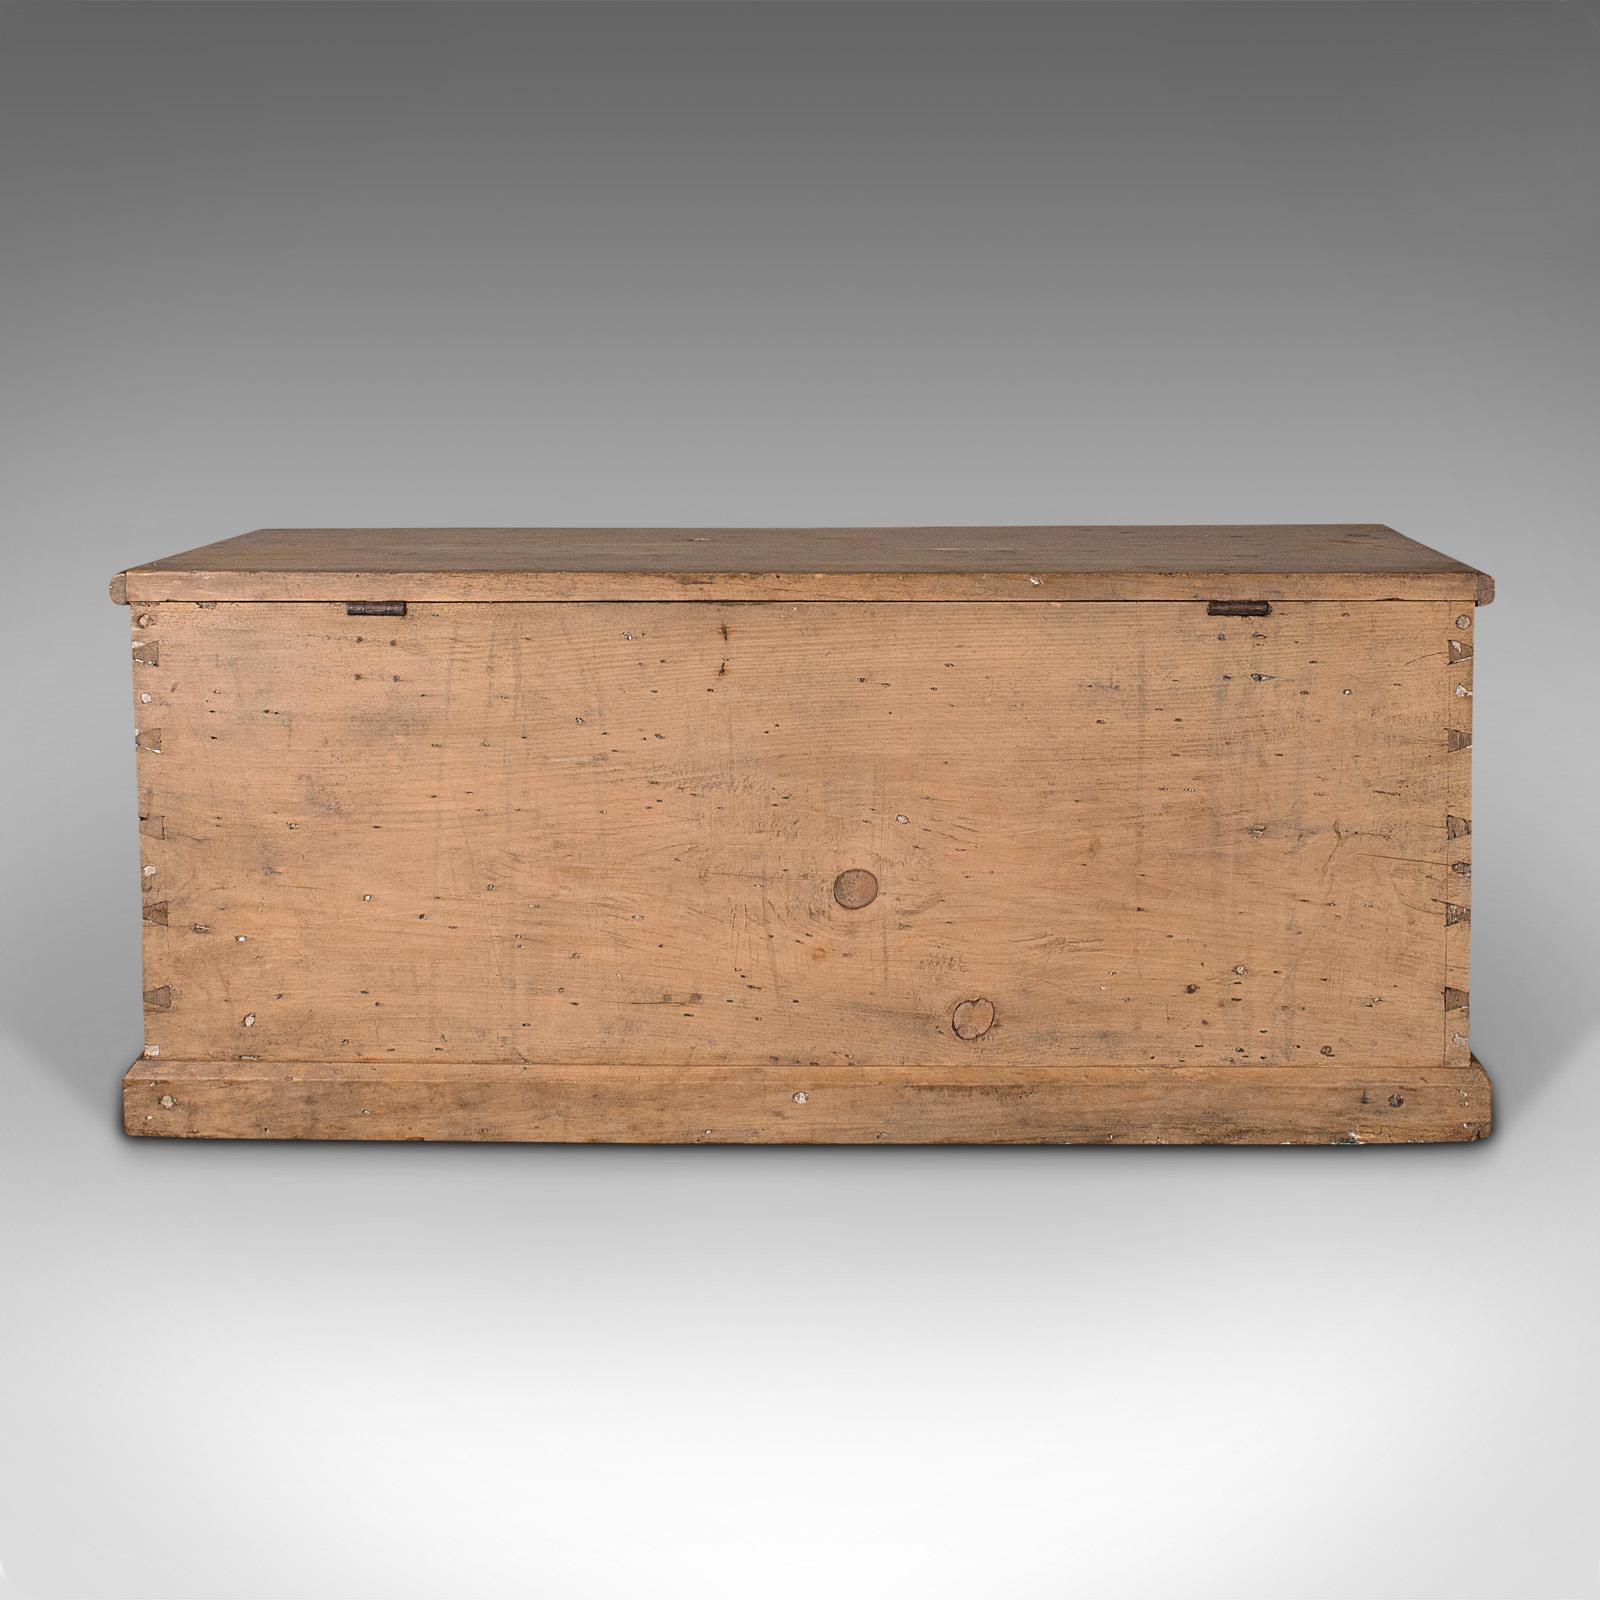 British Antique Blanket Box, English, Pine, Chest, Trunk, Victorian, Coffee Table, 1890